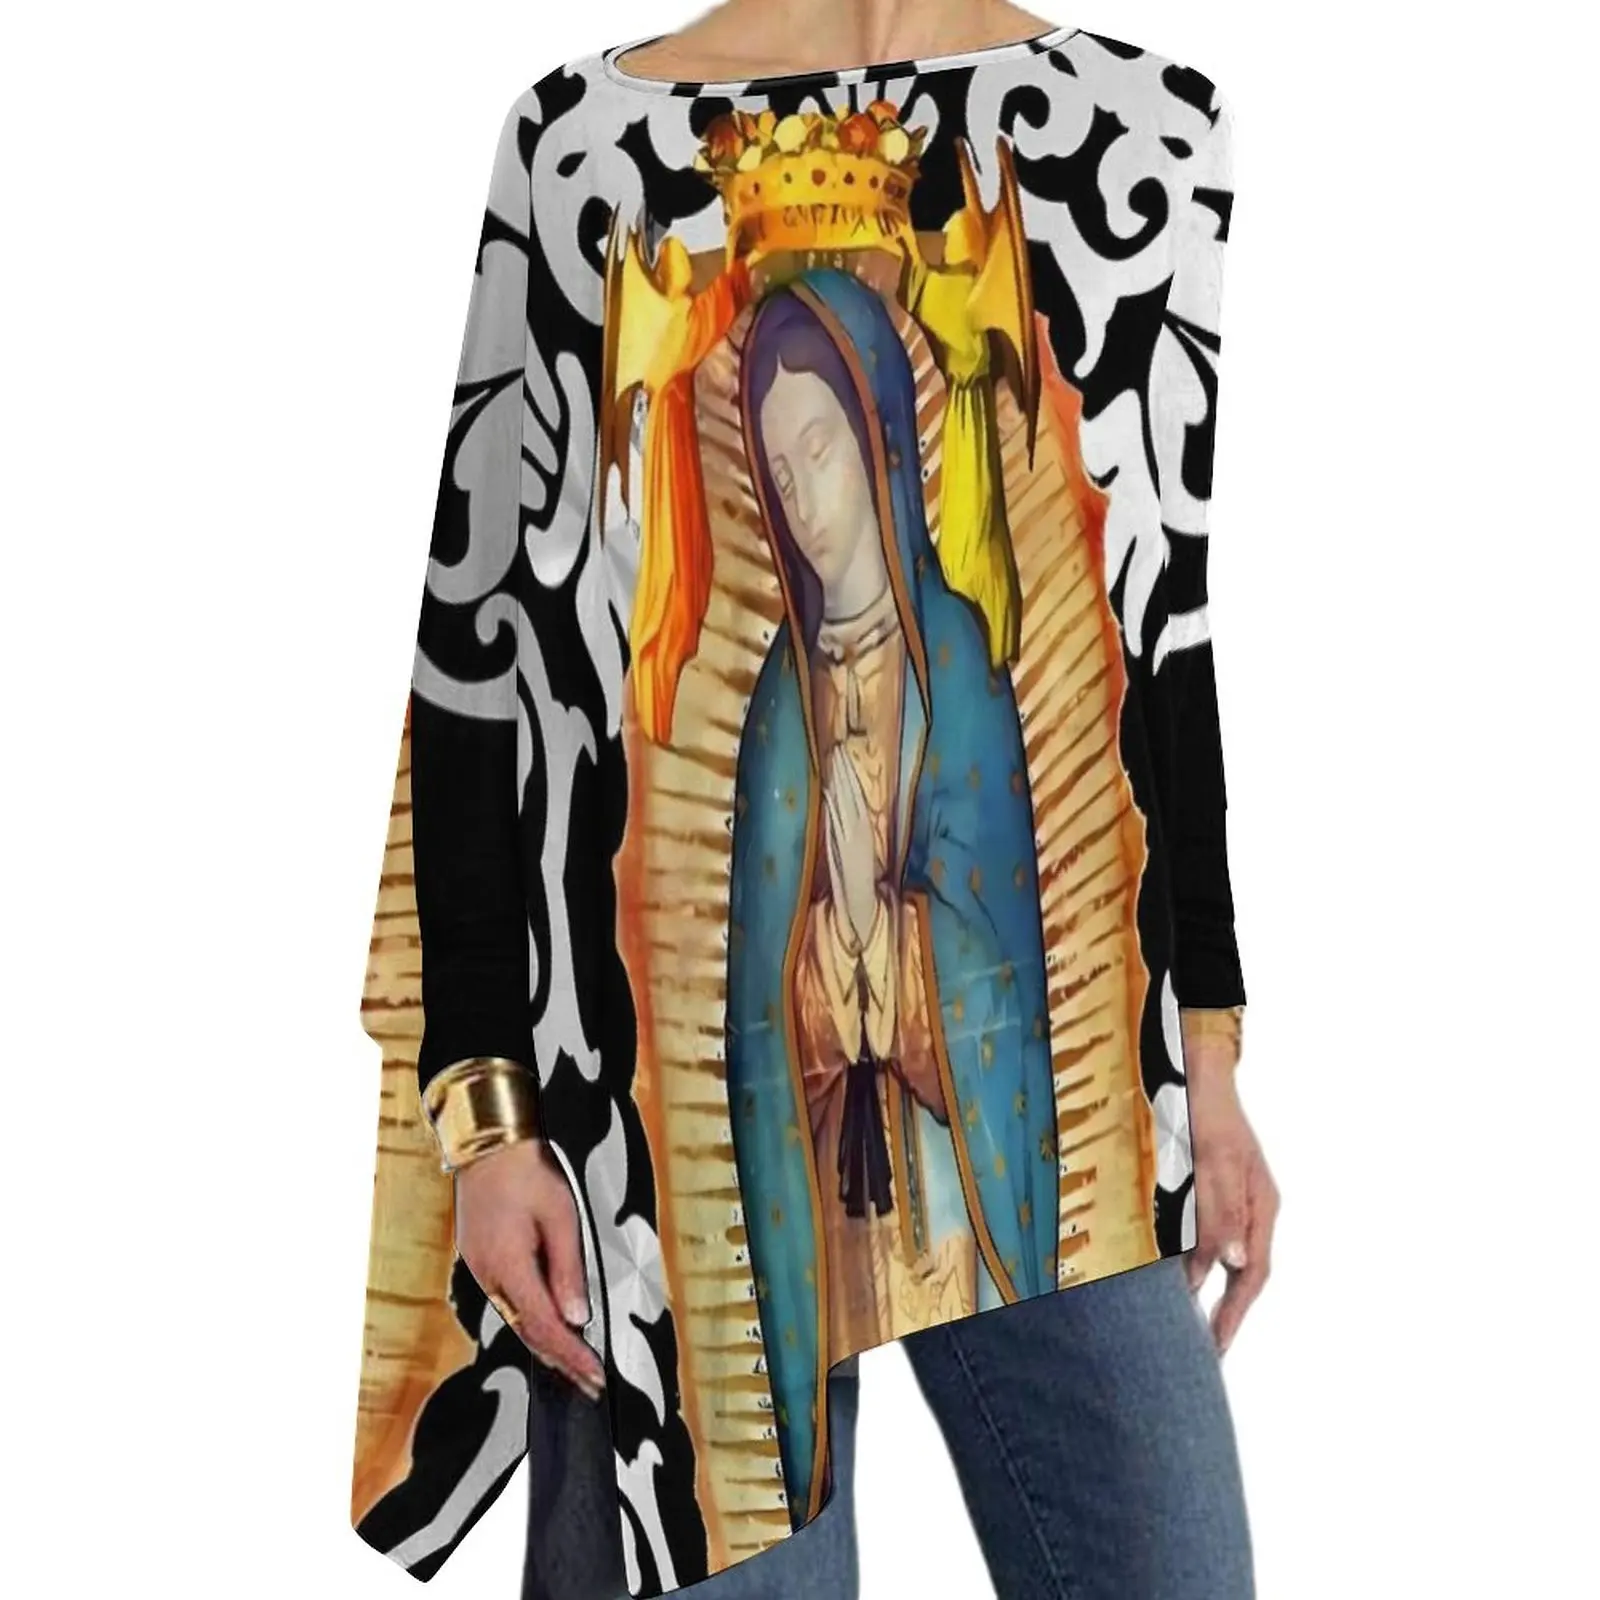 

Mexican Virgen Virgin T Shirt Spring Our Lady of Guadalupe Loose T-Shirts Long-Sleeve Vintage Tee Shirt Ladies Graphic Top Tees